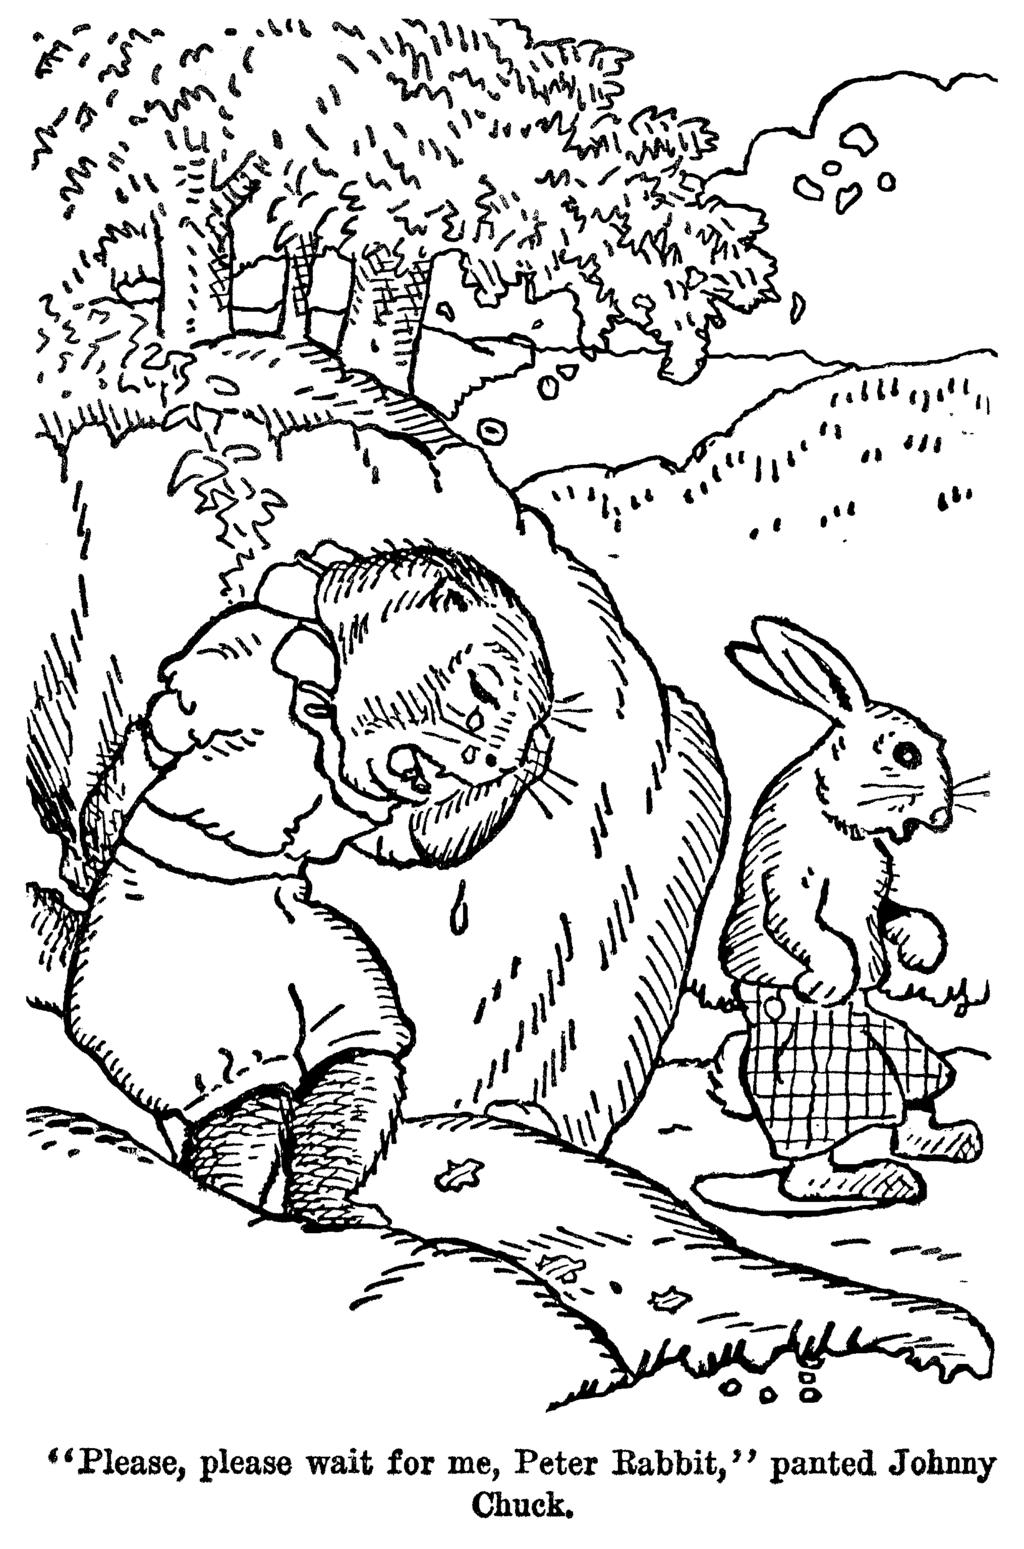 12 Mother West Wind/Peter Rabbit Free Downloadable Coloring Book Please, please wait for me Peter Rabbit,